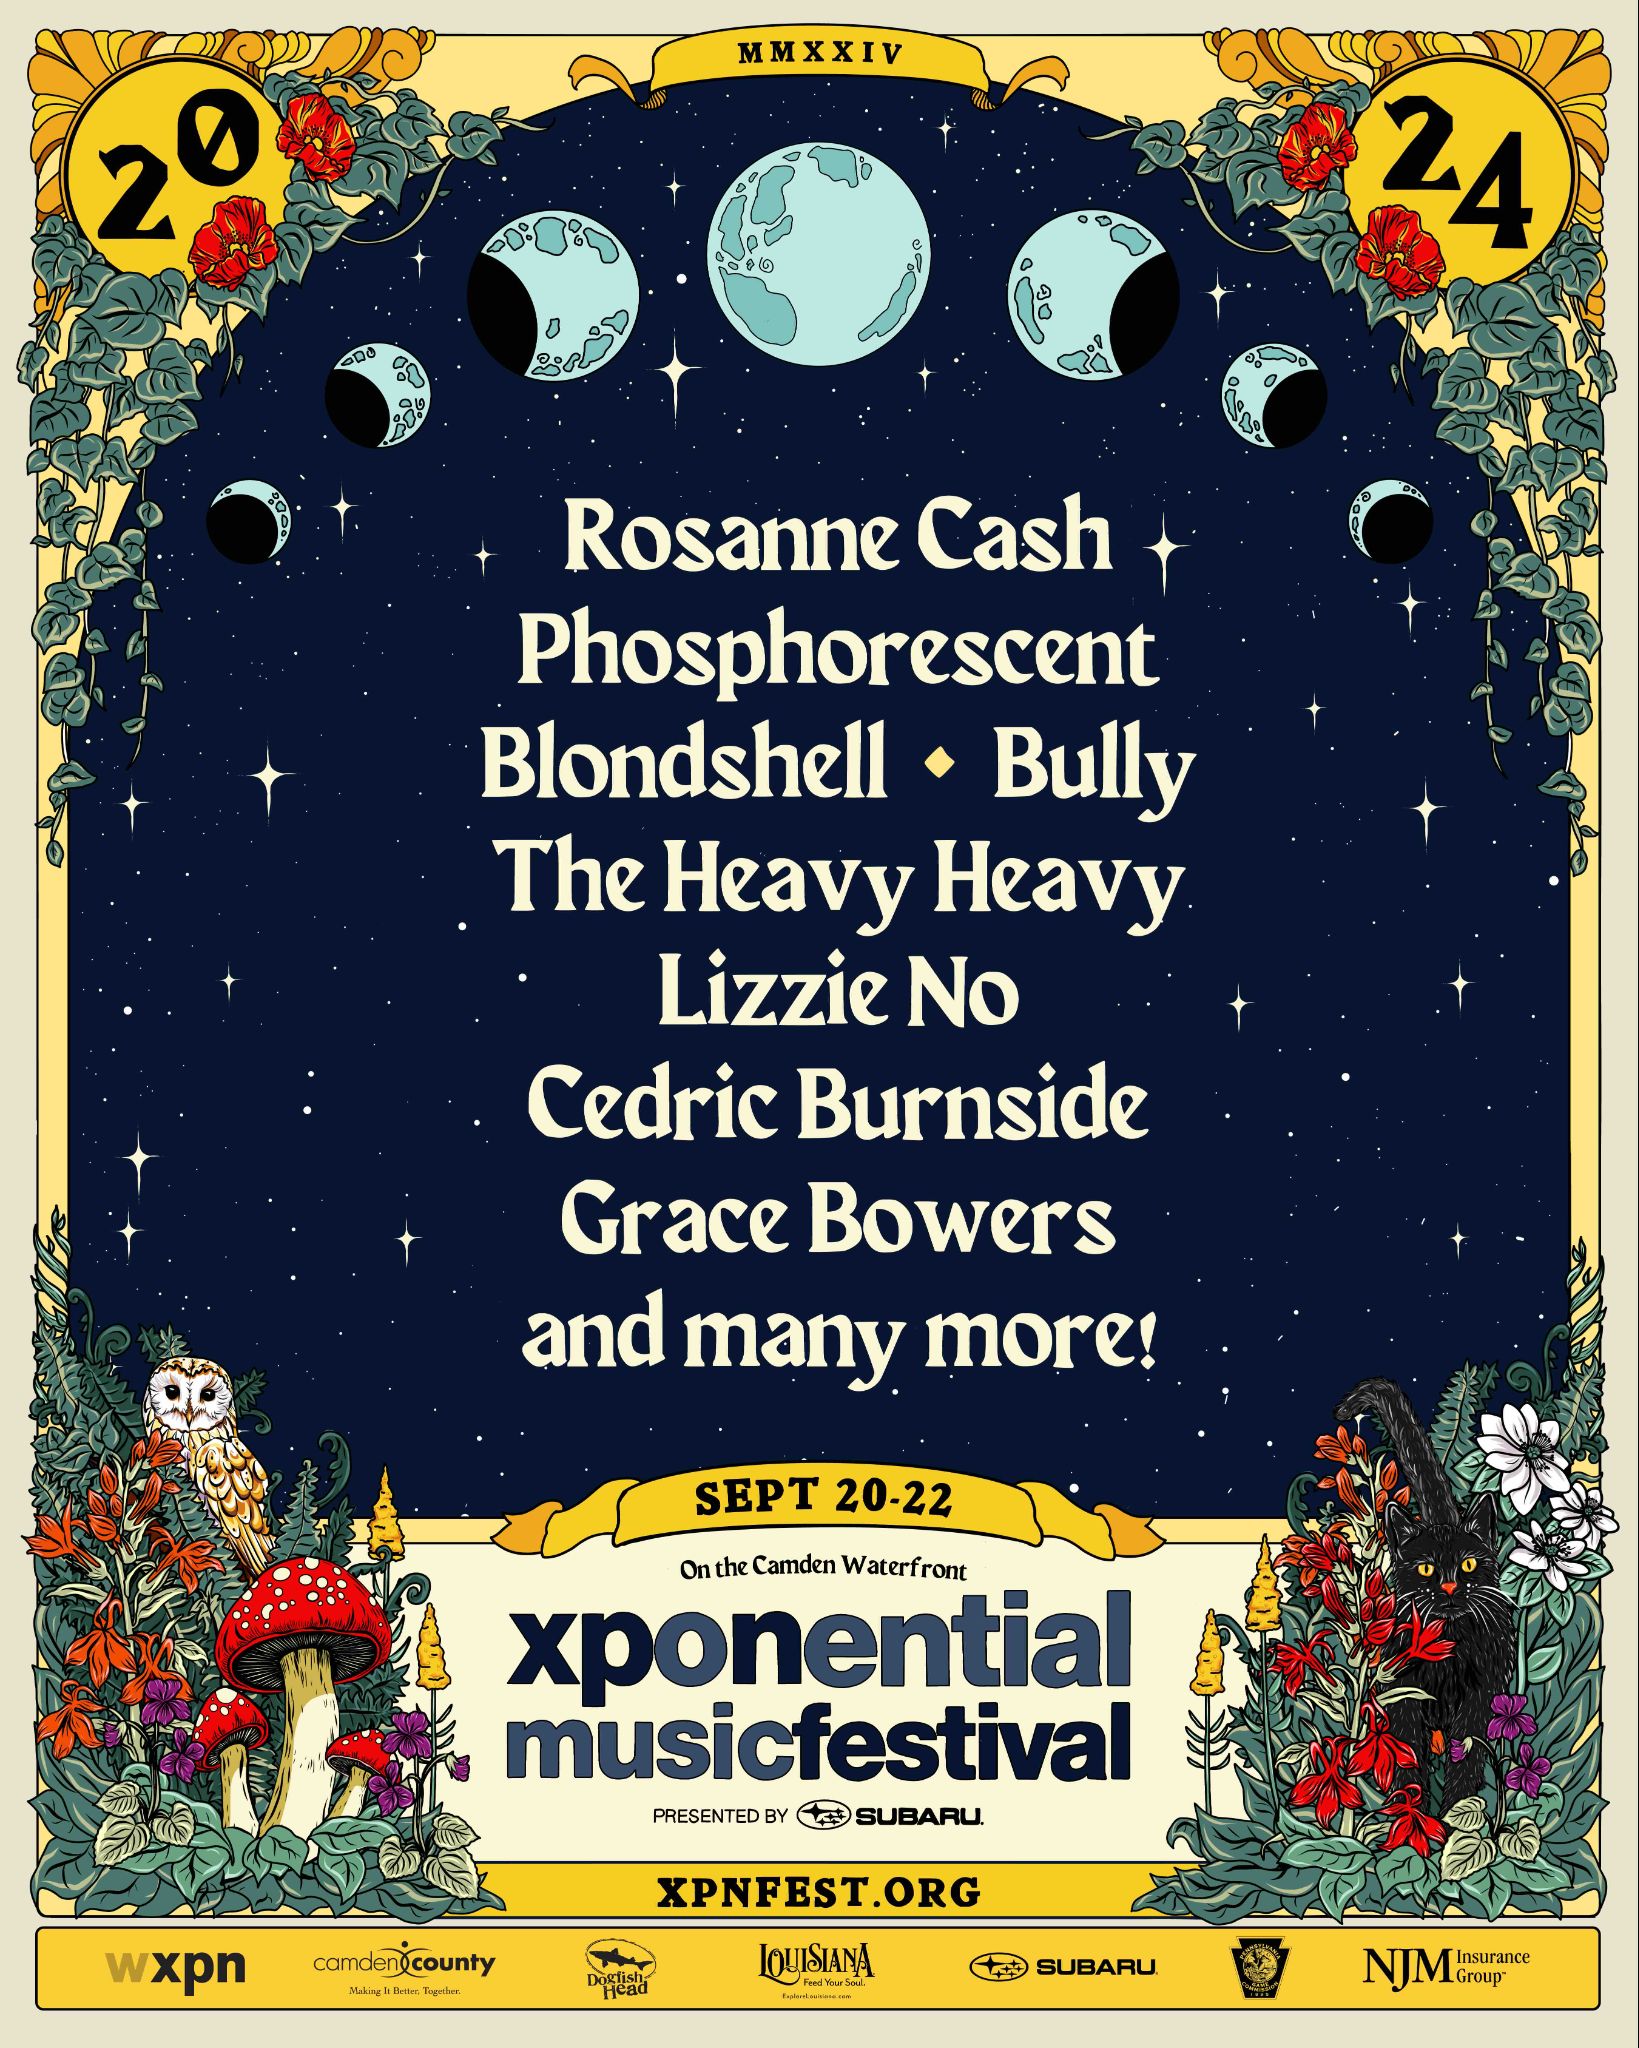 WXPN announces initial lineup of artists playing its XPoNential Music Festival Sept. 20-22